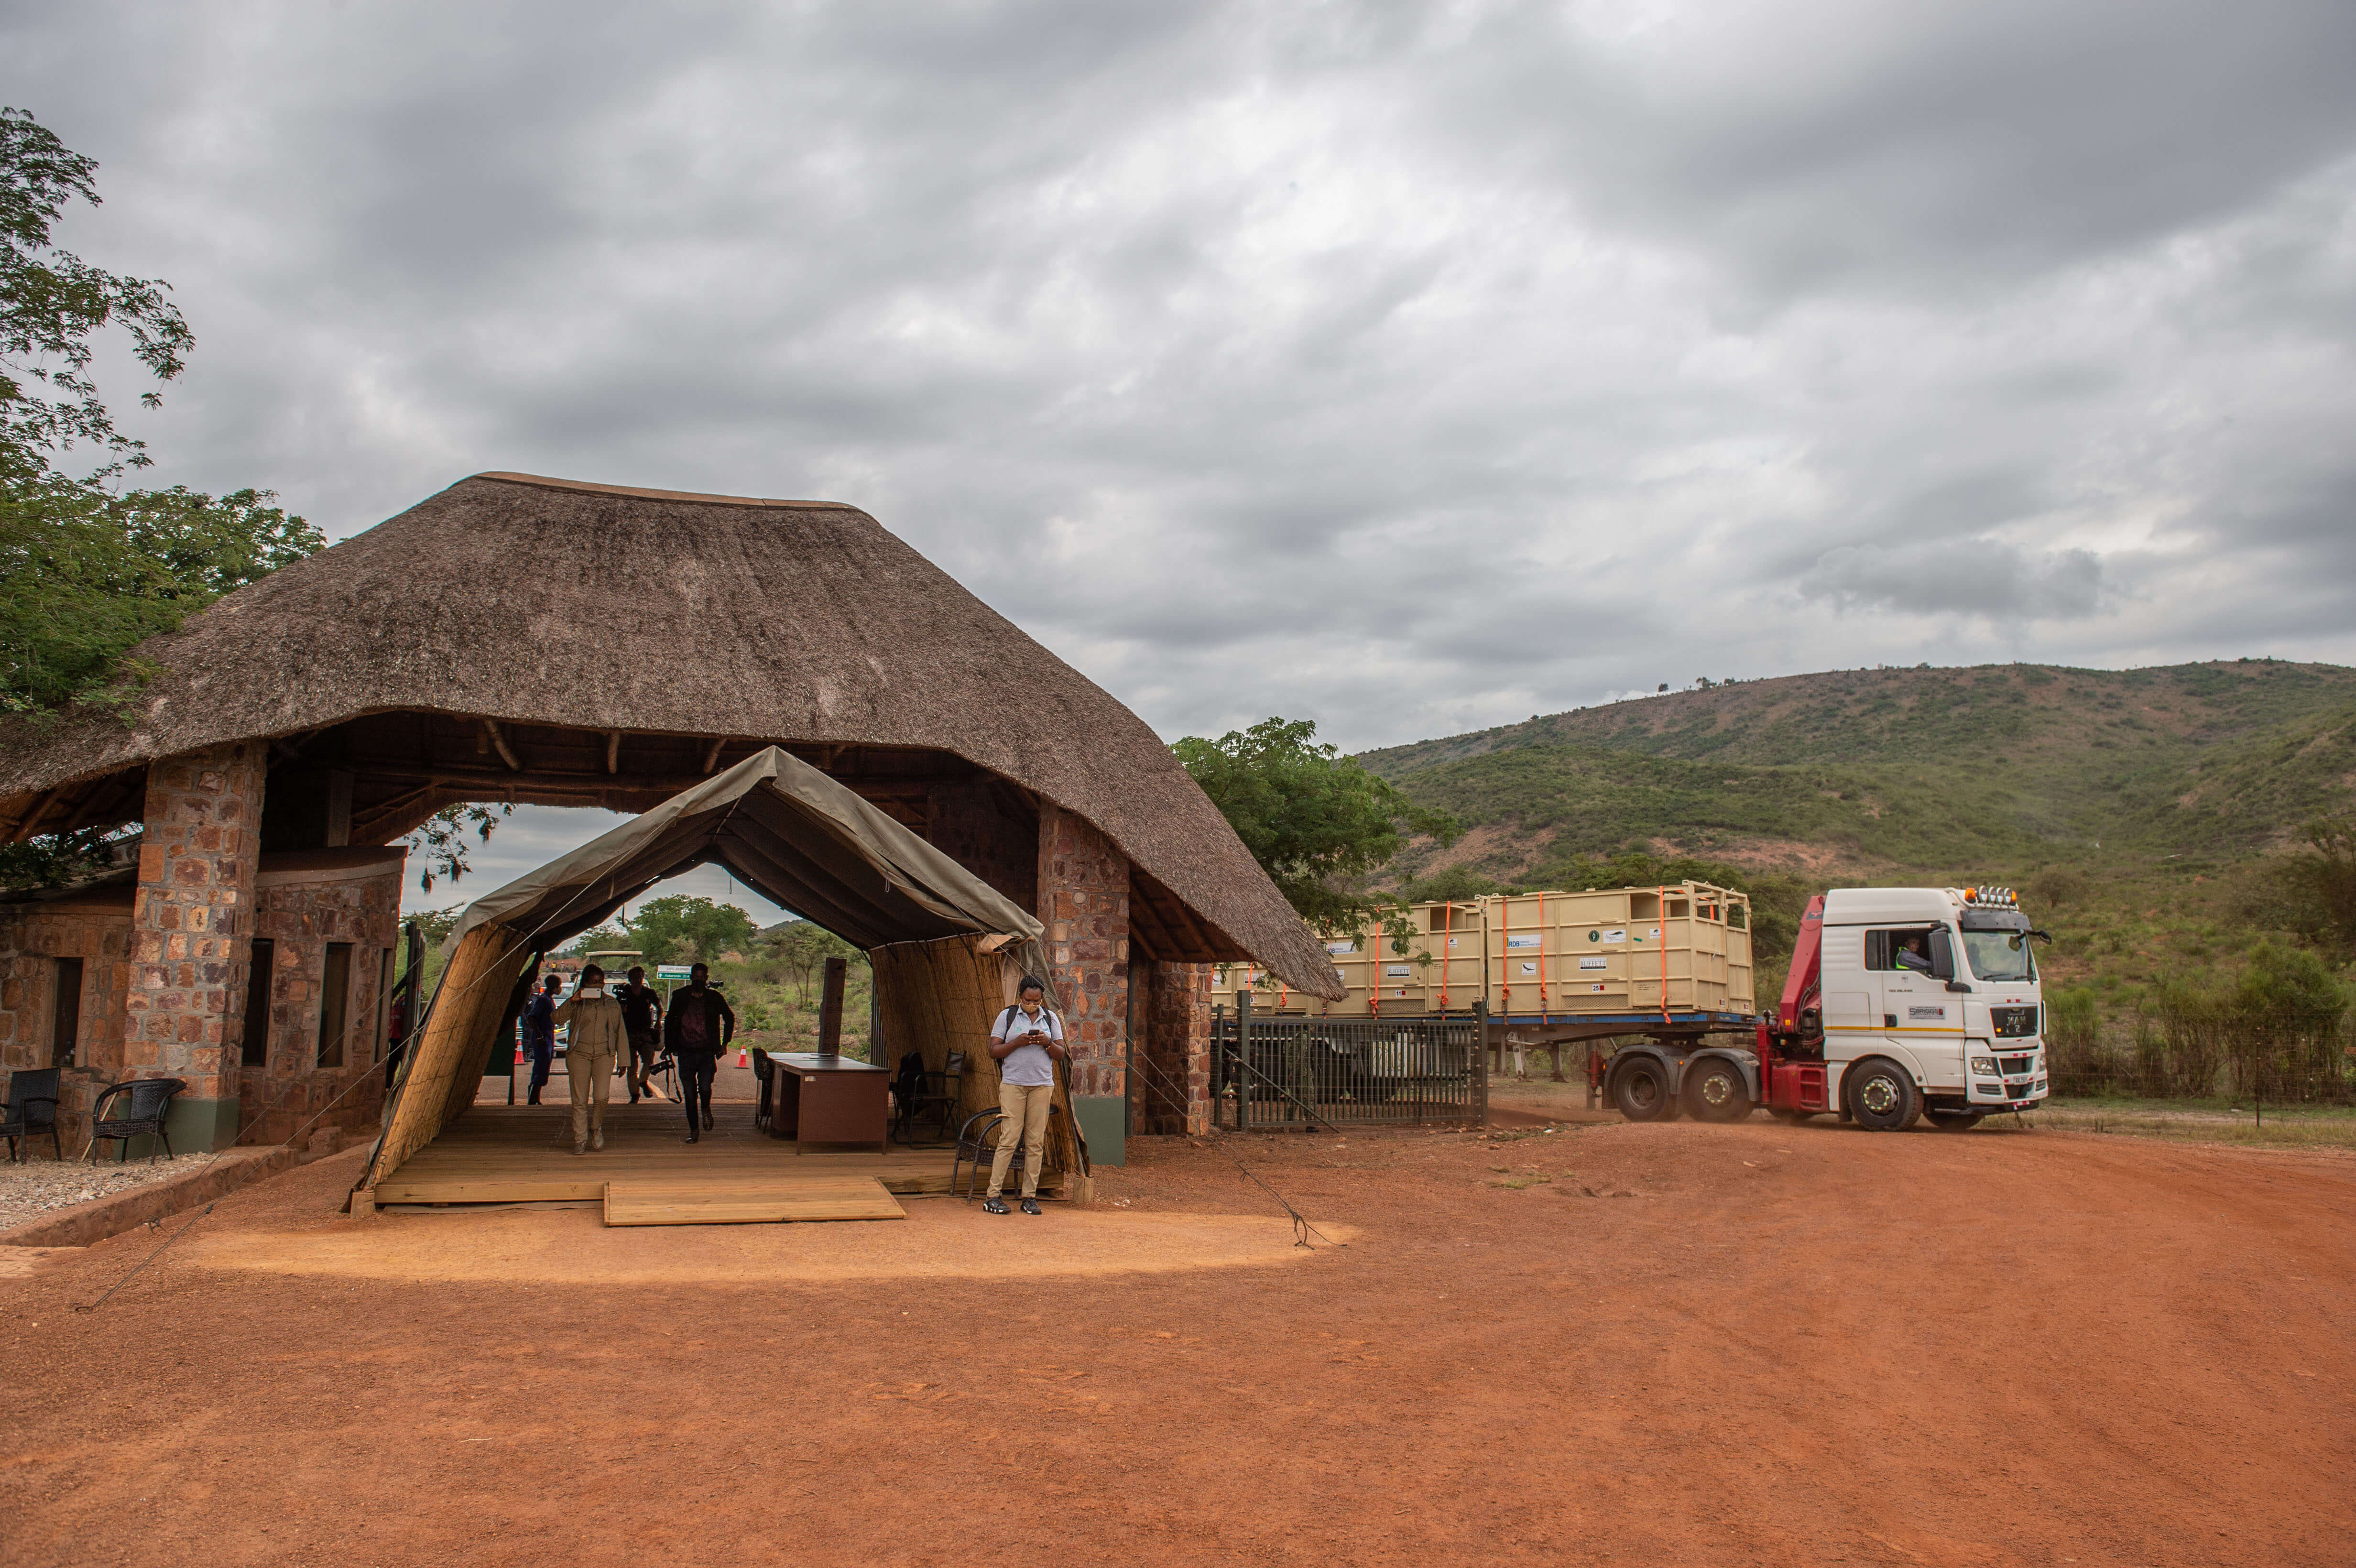 The trucks carrying rhinos arrive to the entrance gate of Akagera National Park